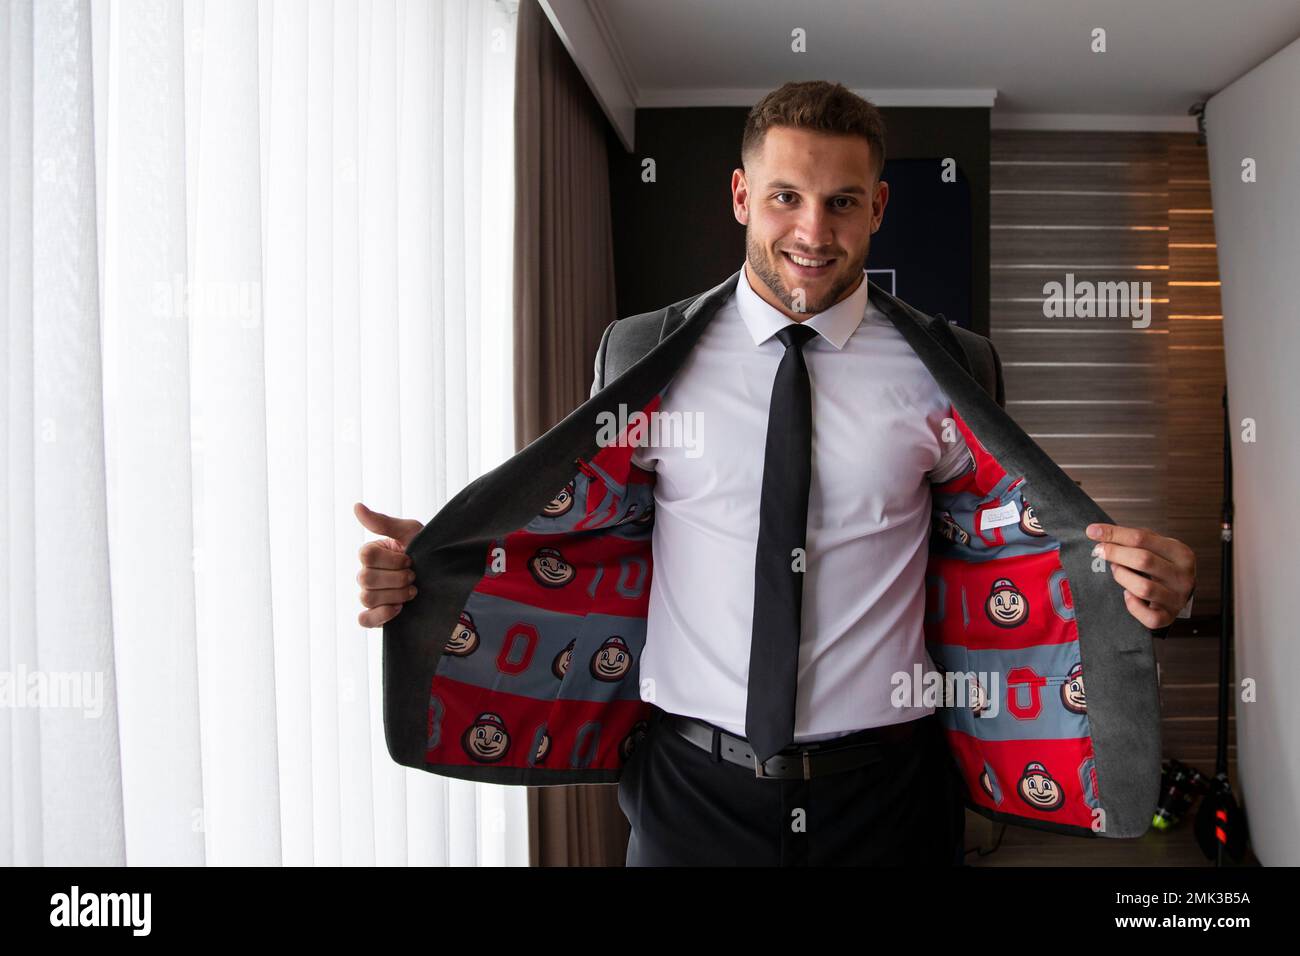 IMAGE DISTRIBUTED FOR JCPENNEY - Top NFL Draft prospect, Nick Bosa